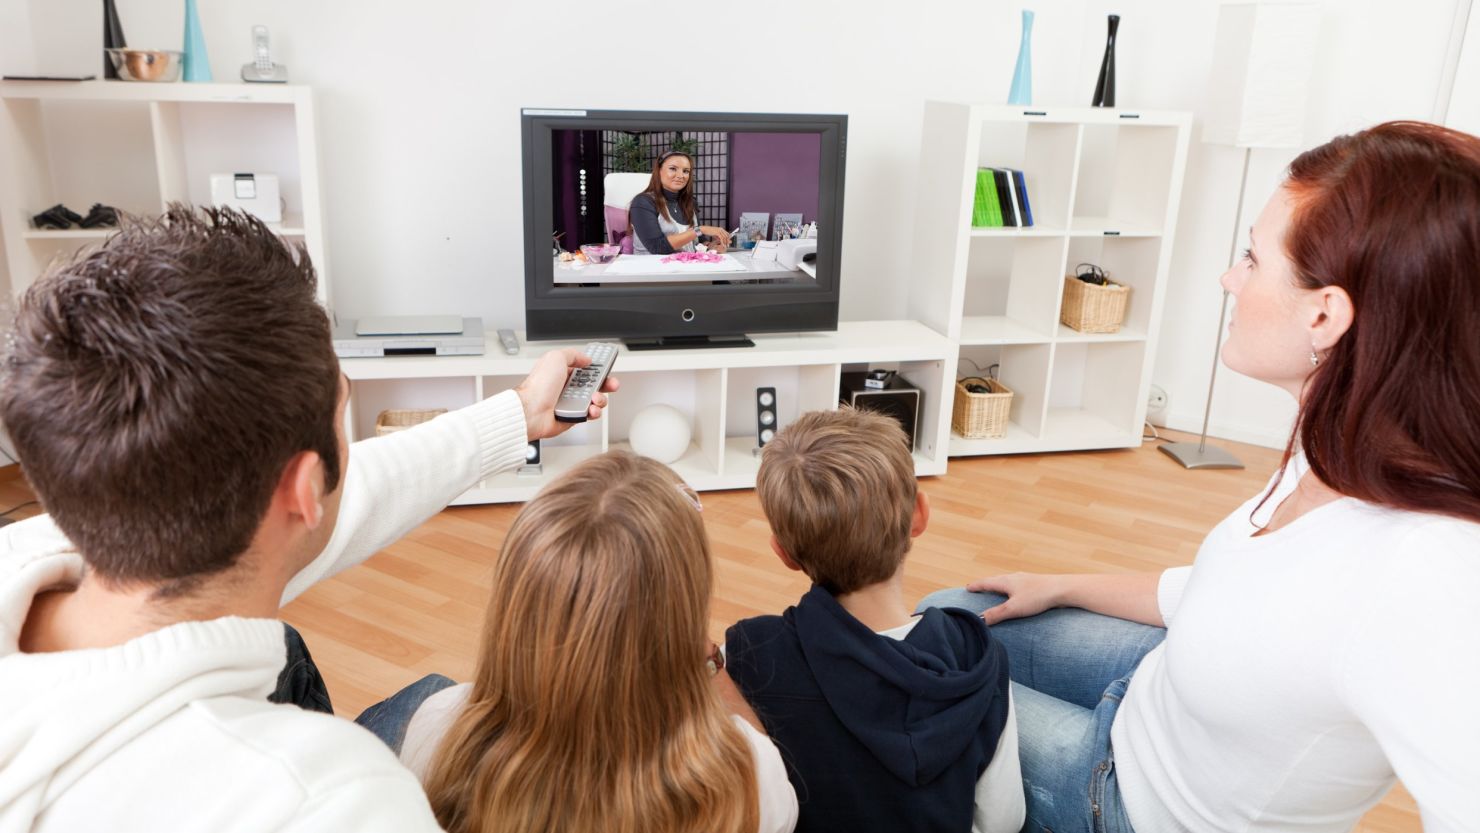 What we're watching on TV may affect how much we eat, a new study suggests.